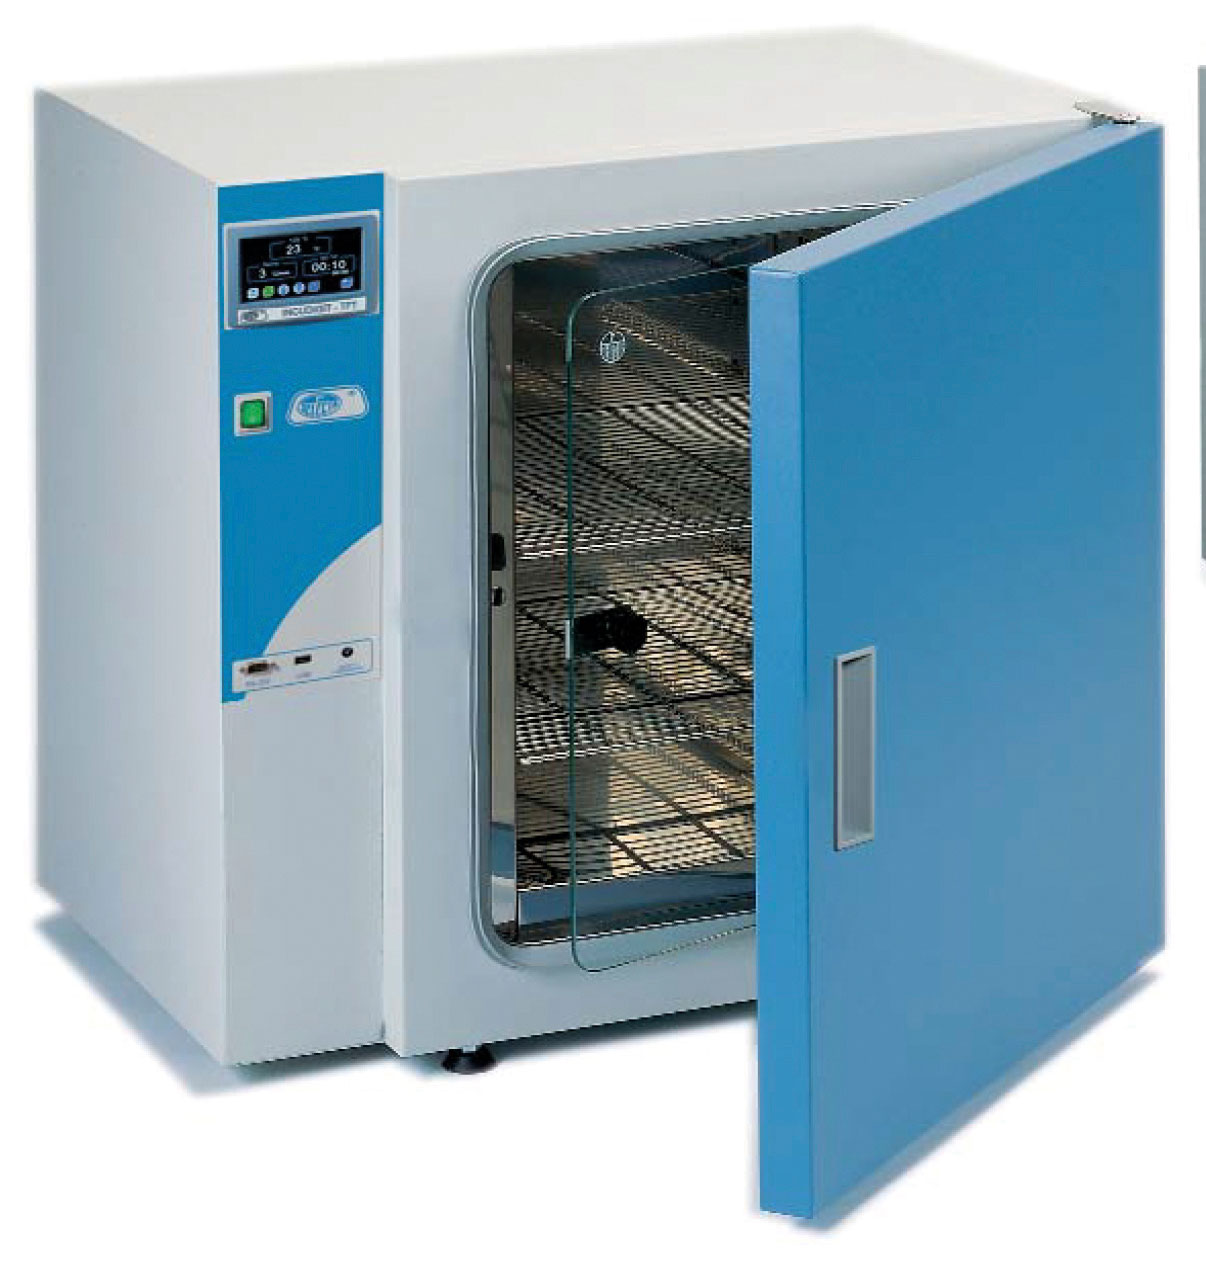 Bacteriological incubator INCUDIGIT-TFT. J.P. SELECTA. T range (ºC): 5 above ambient to 80. Volume (l): 80. Weight (Kg): 54. Doors: 1. Consumption at 37º (W): 300